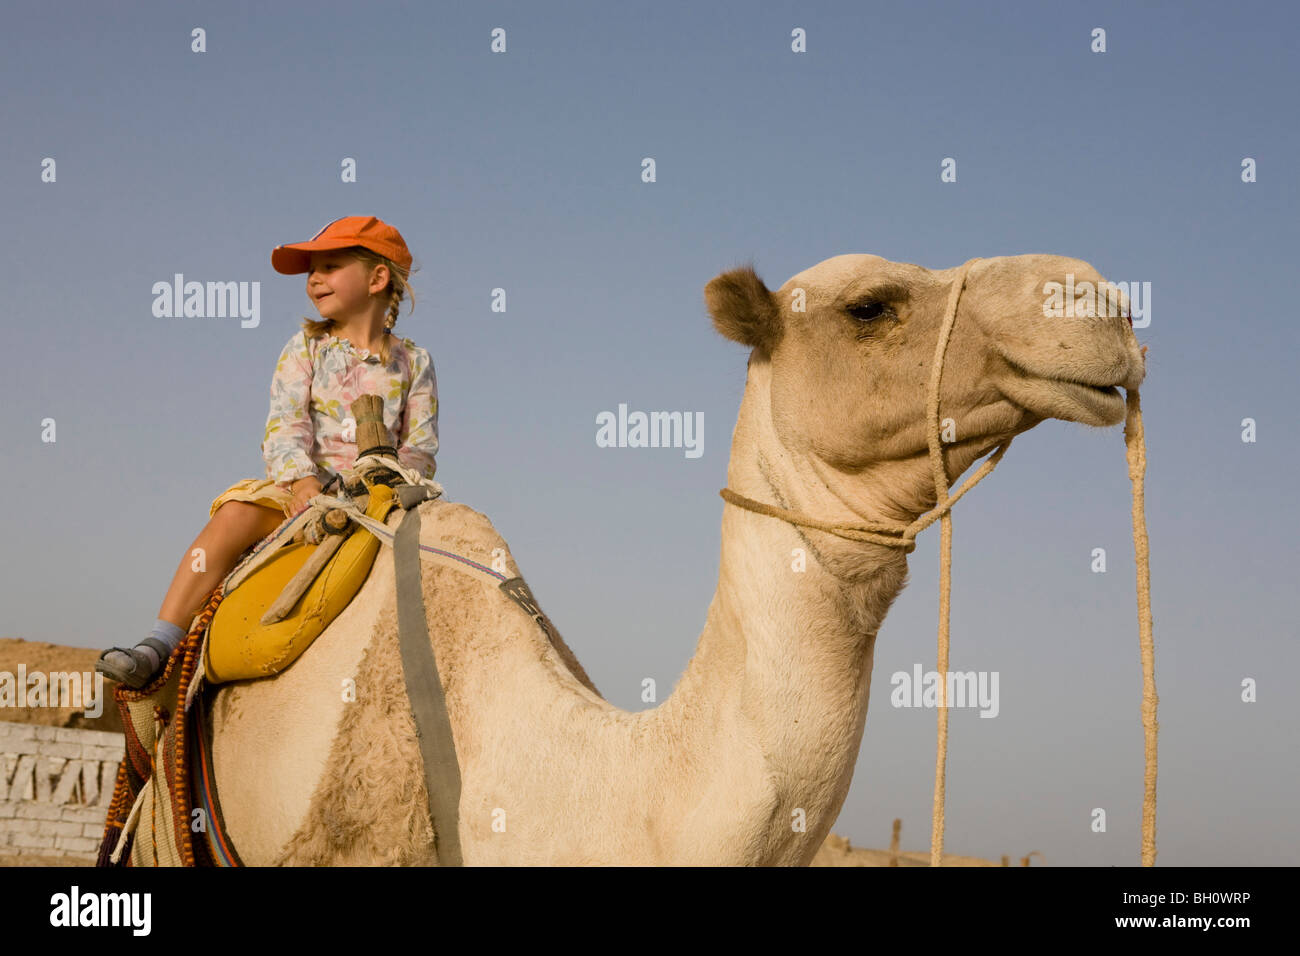 Child, girl, 5, riding a camel in the Marsa Alam desert, Red Sea, Egypt Stock Photo